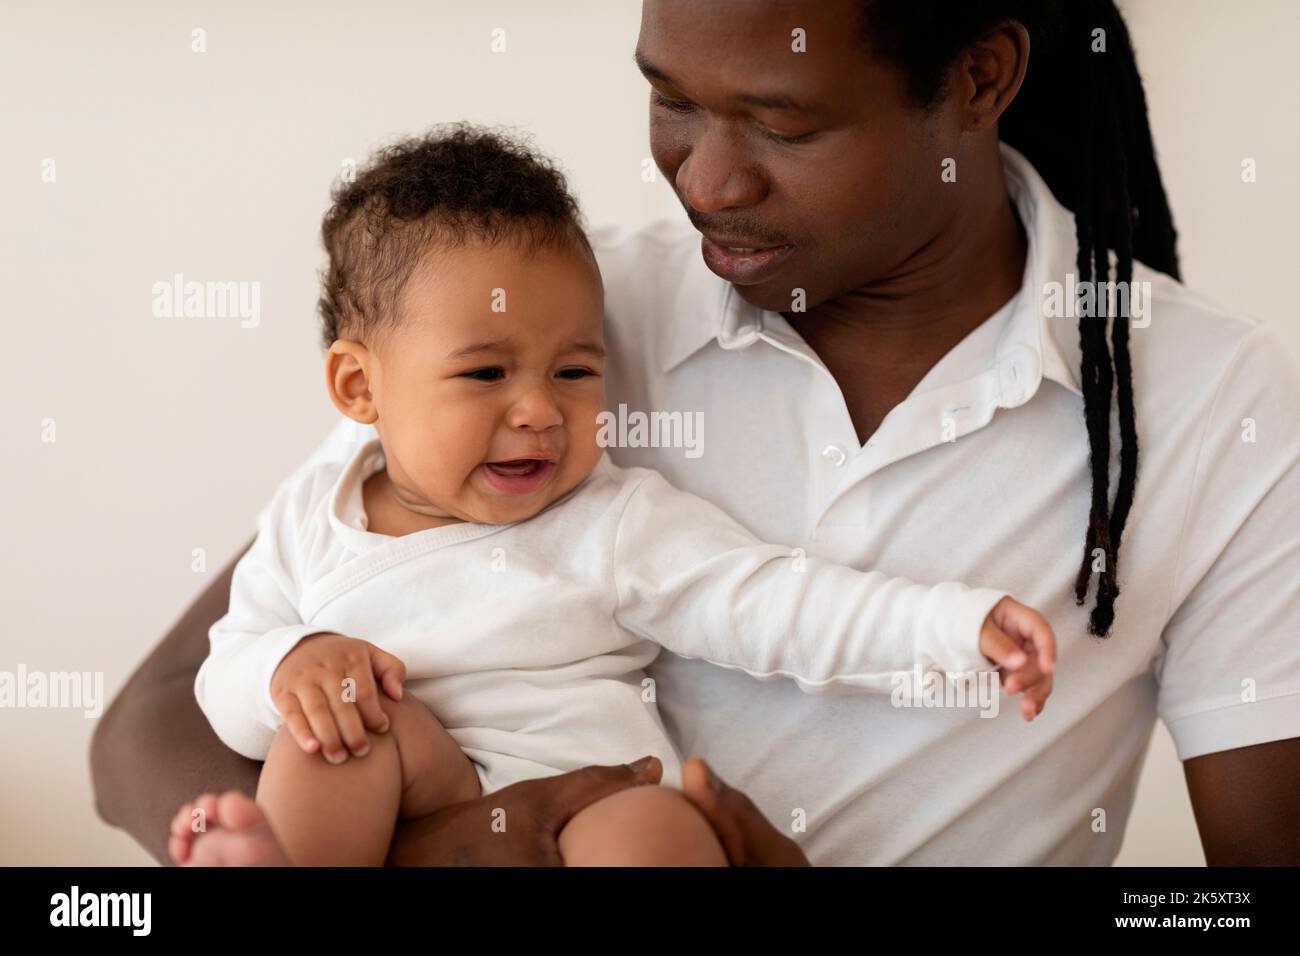 Portrait Of Little Black Baby Crying In Father's Arms Stock Photo